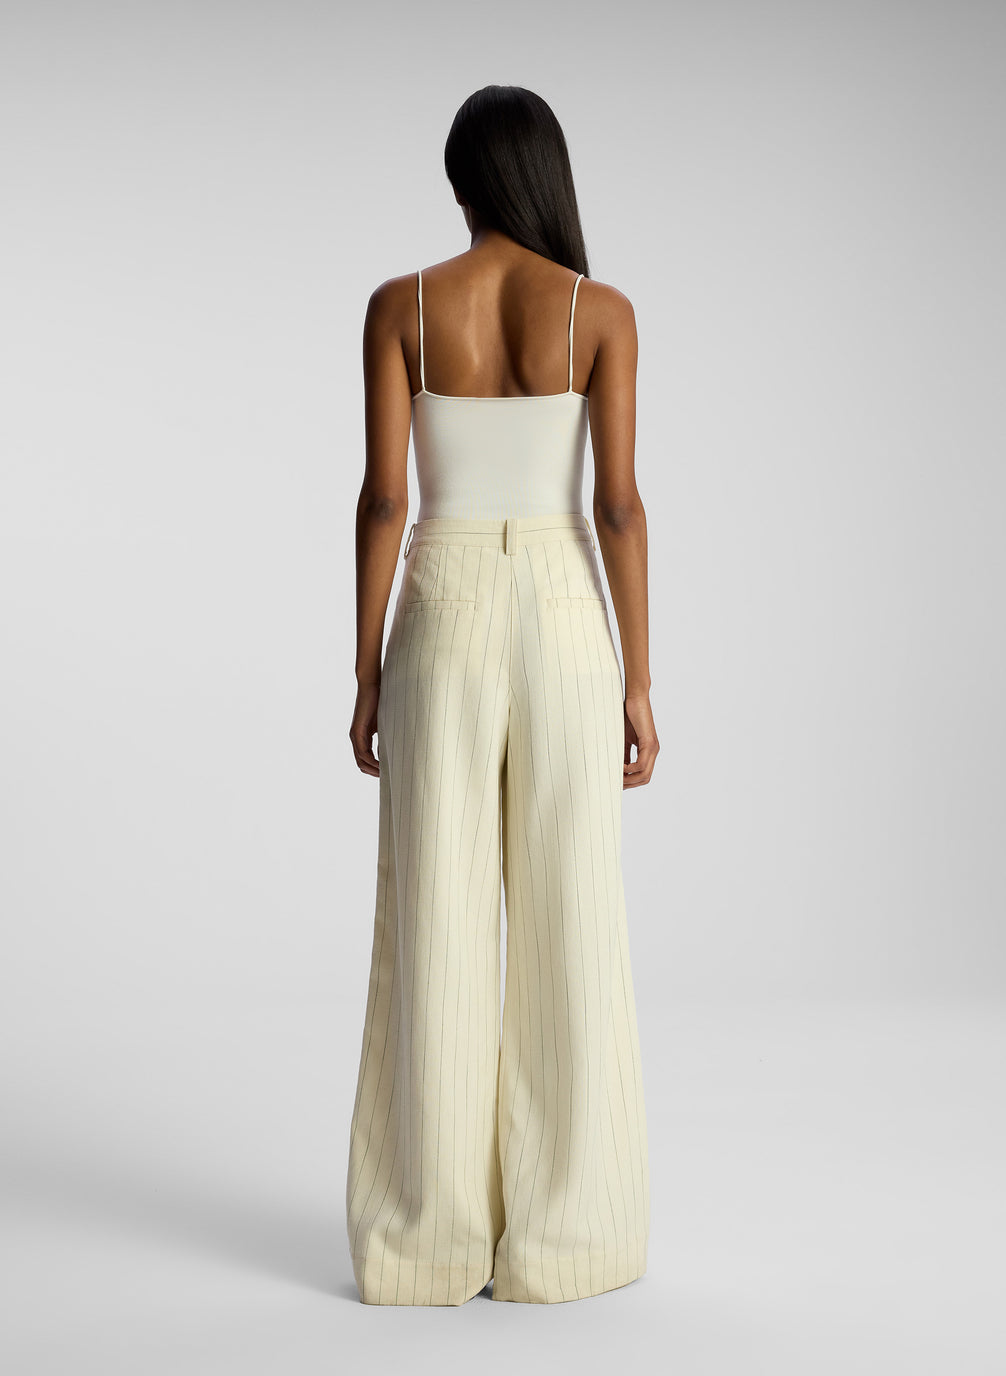 back view of woman earing cream bodysuit and cream pinstripe pant